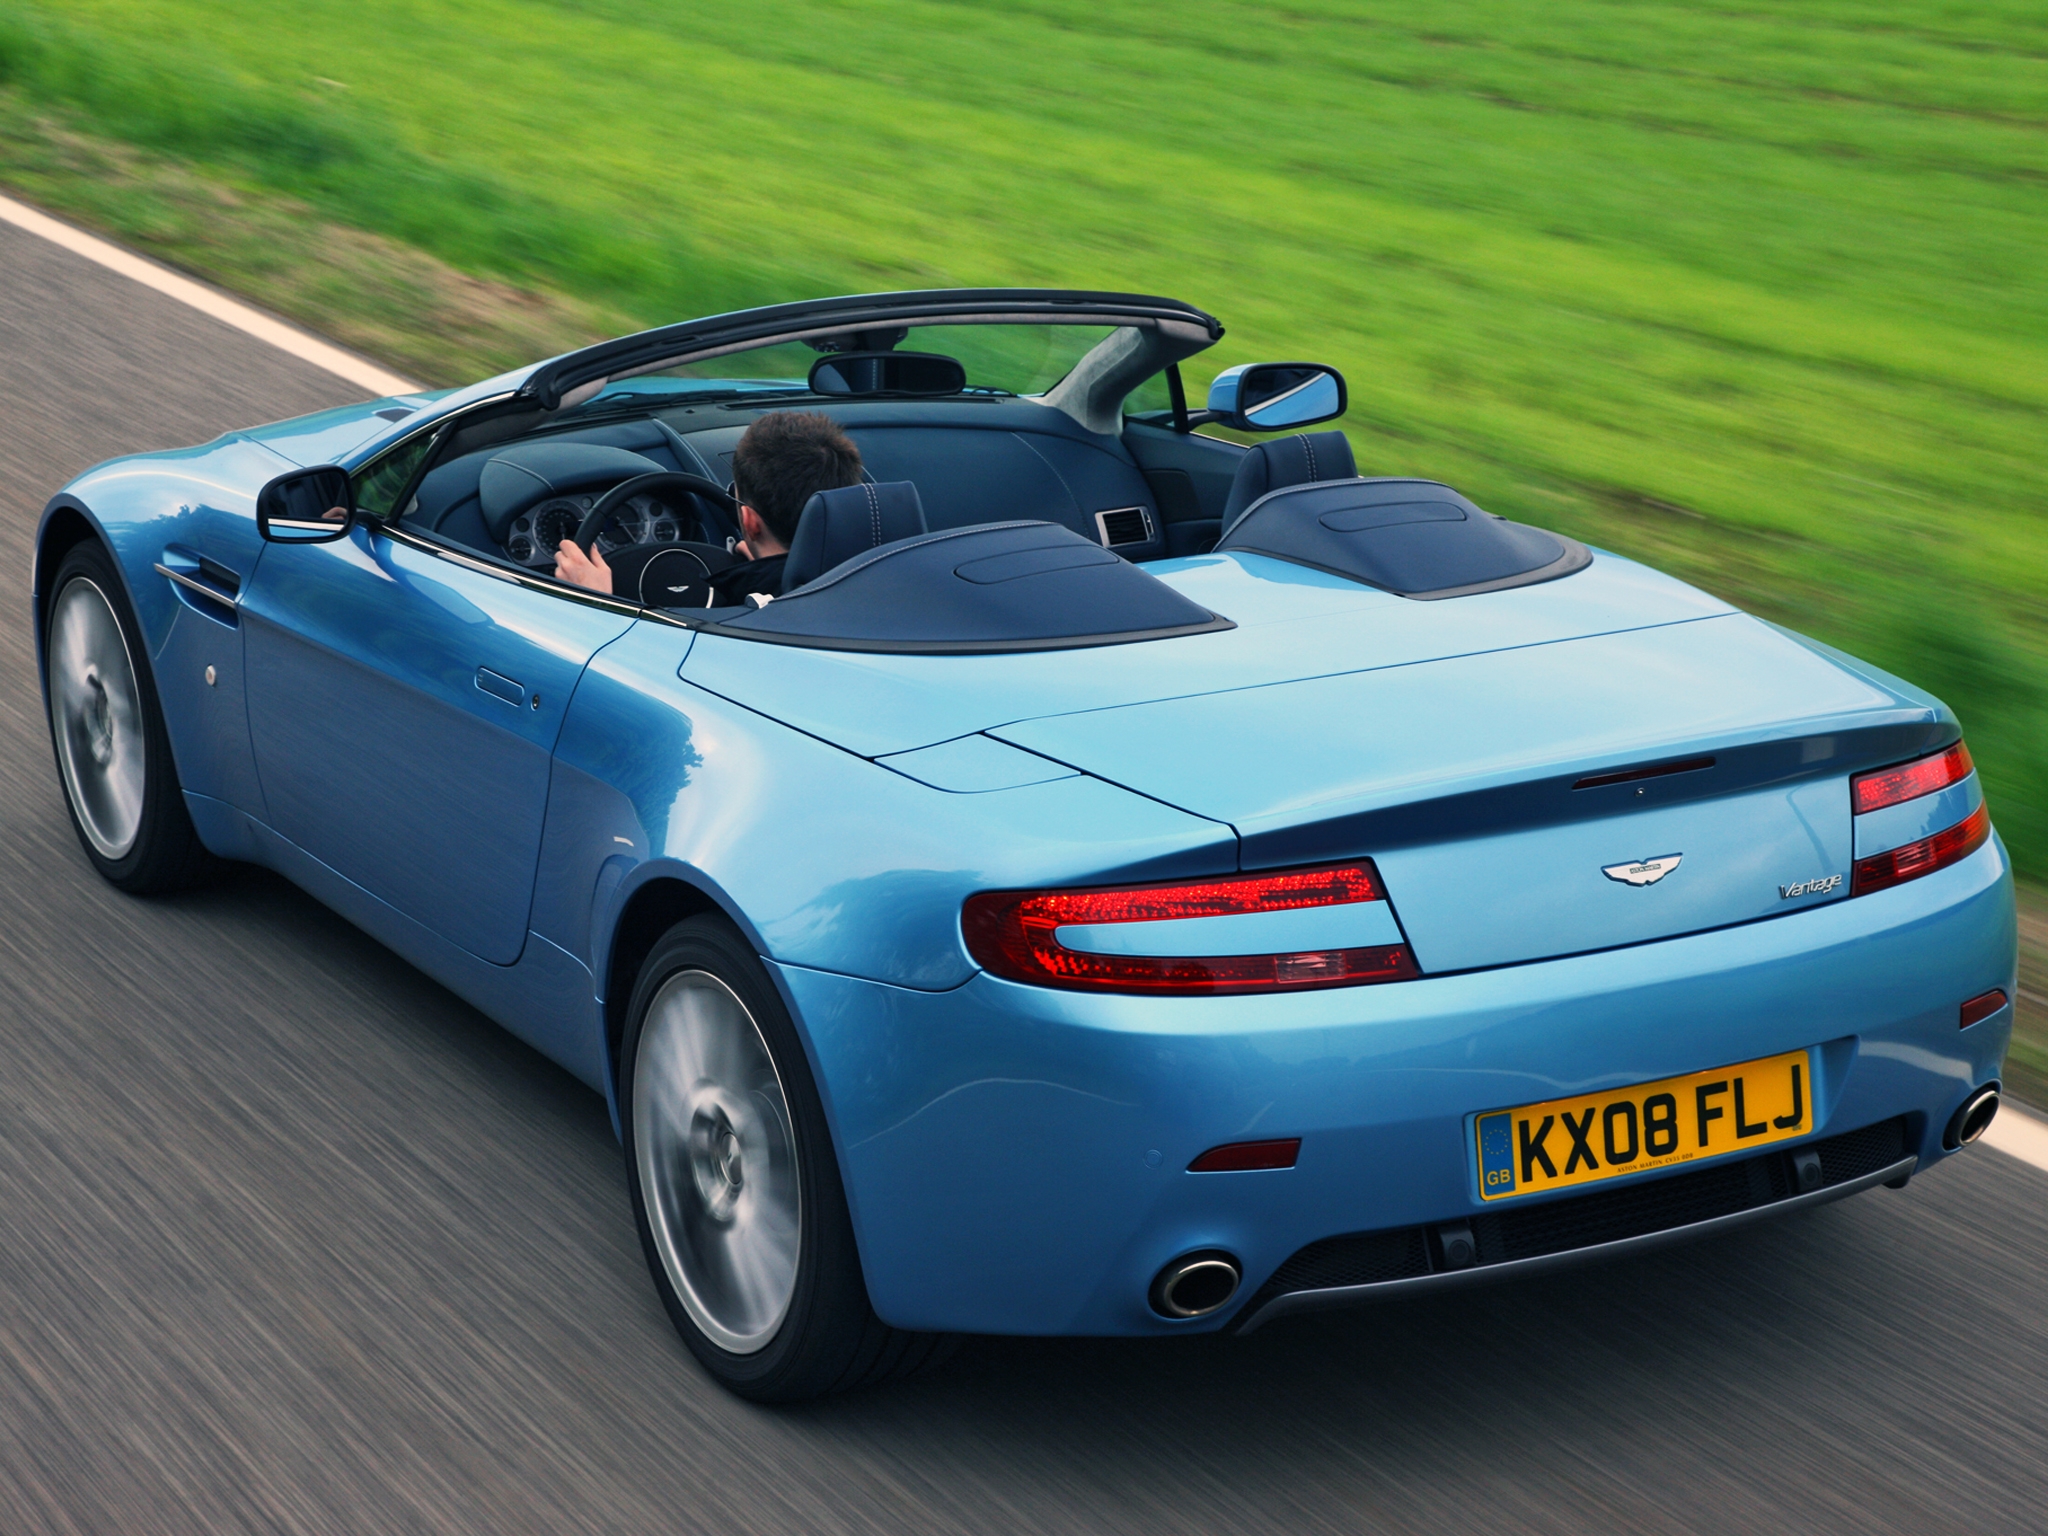 back view, aston martin, cars, blue, rear view, speed, style, 2008, v8, vantage Full HD